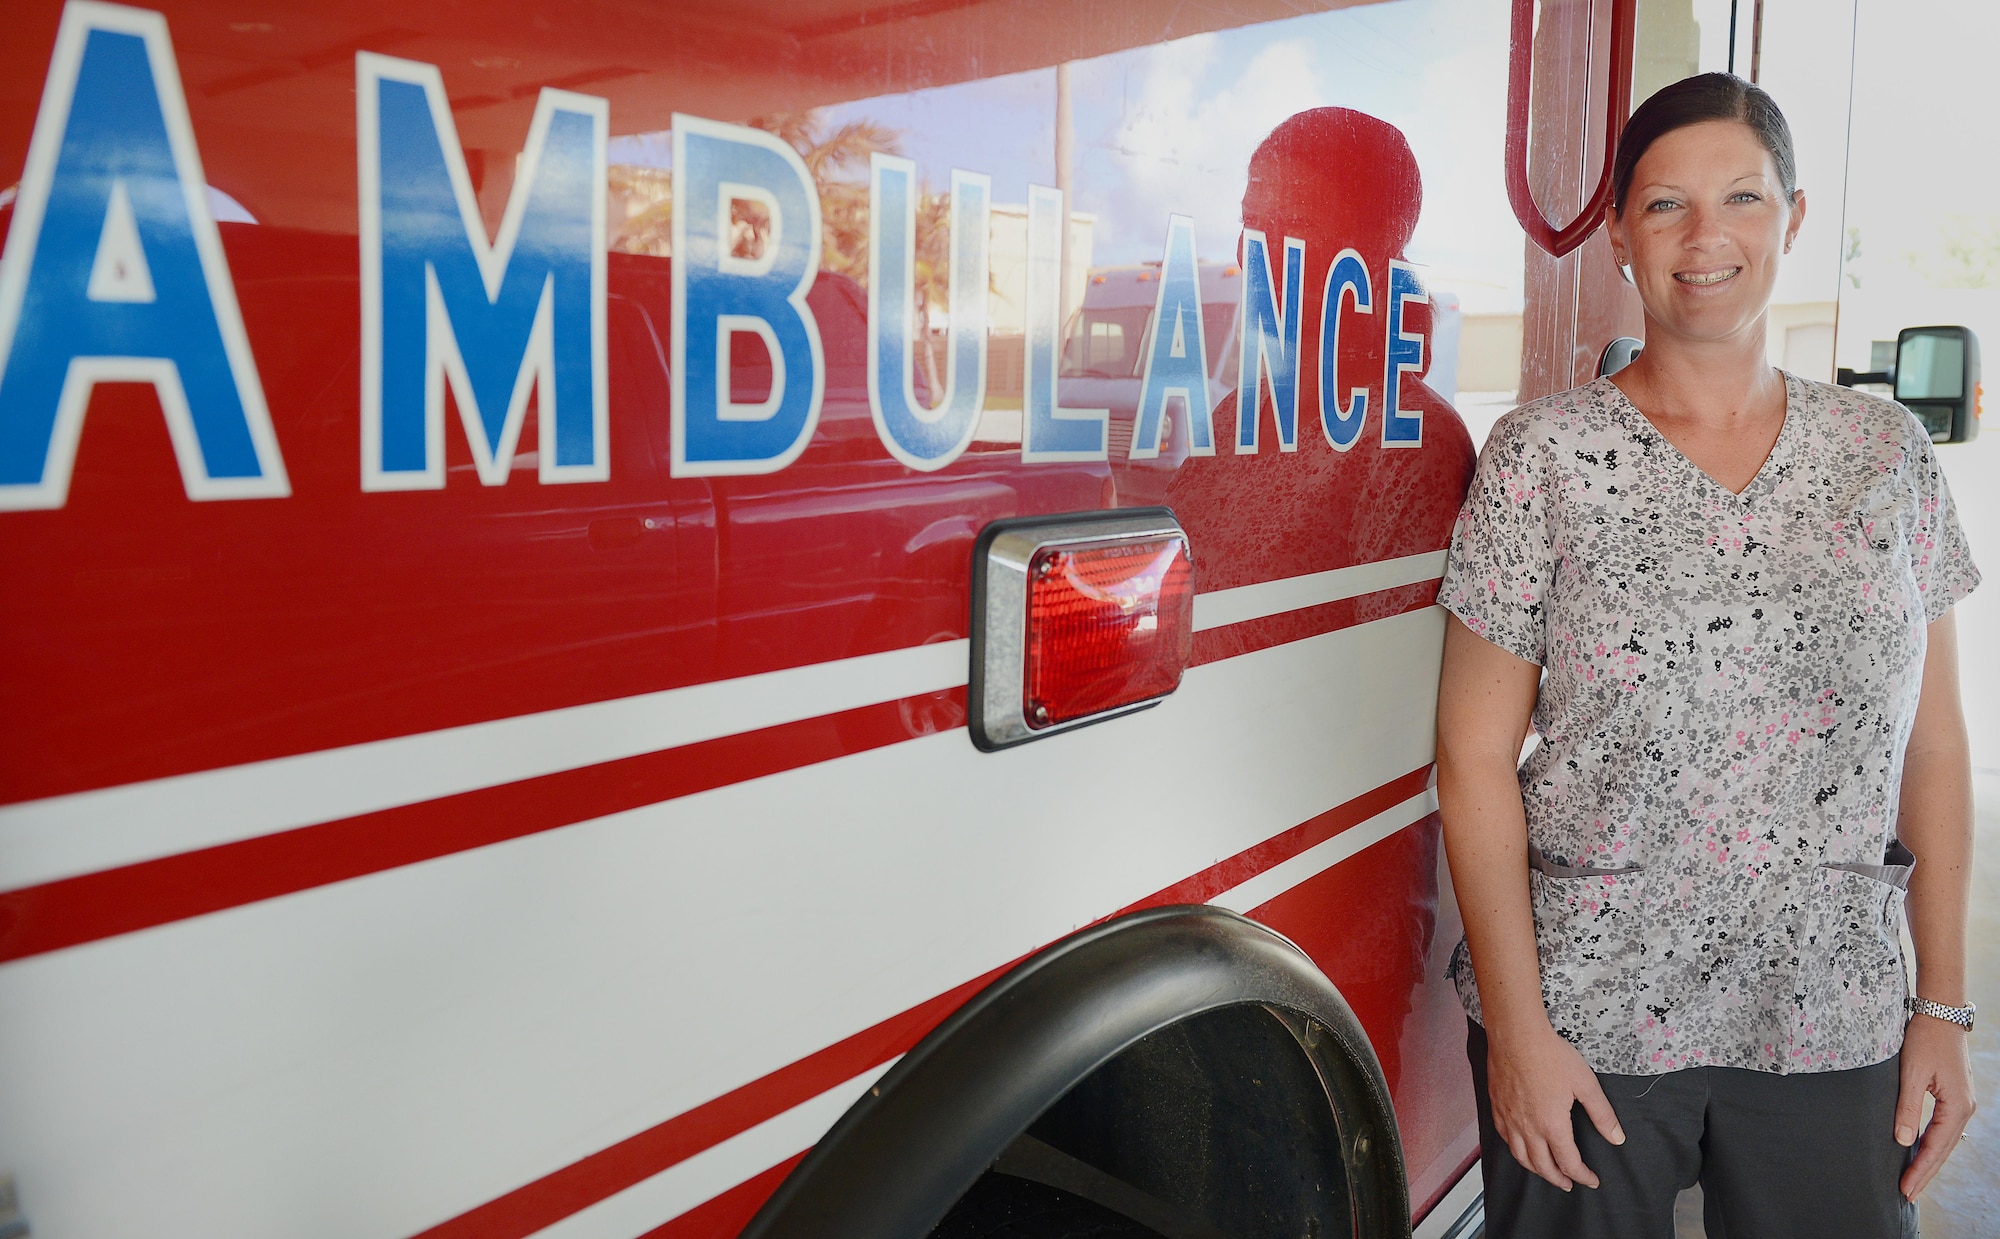 Elizabeth Tullis, 36th Medical Group registered nurse, helped save the life of a 12 year-old child March 12, 2016, in Tamuning, Guam. With her experience as a former lifeguard, aquatics director and now a nurse, Tullis provided the best care possible to the girl before medical help arrived on scene. (U.S. Air Force photo by Airman 1st Class Arielle Vasquez/Released)